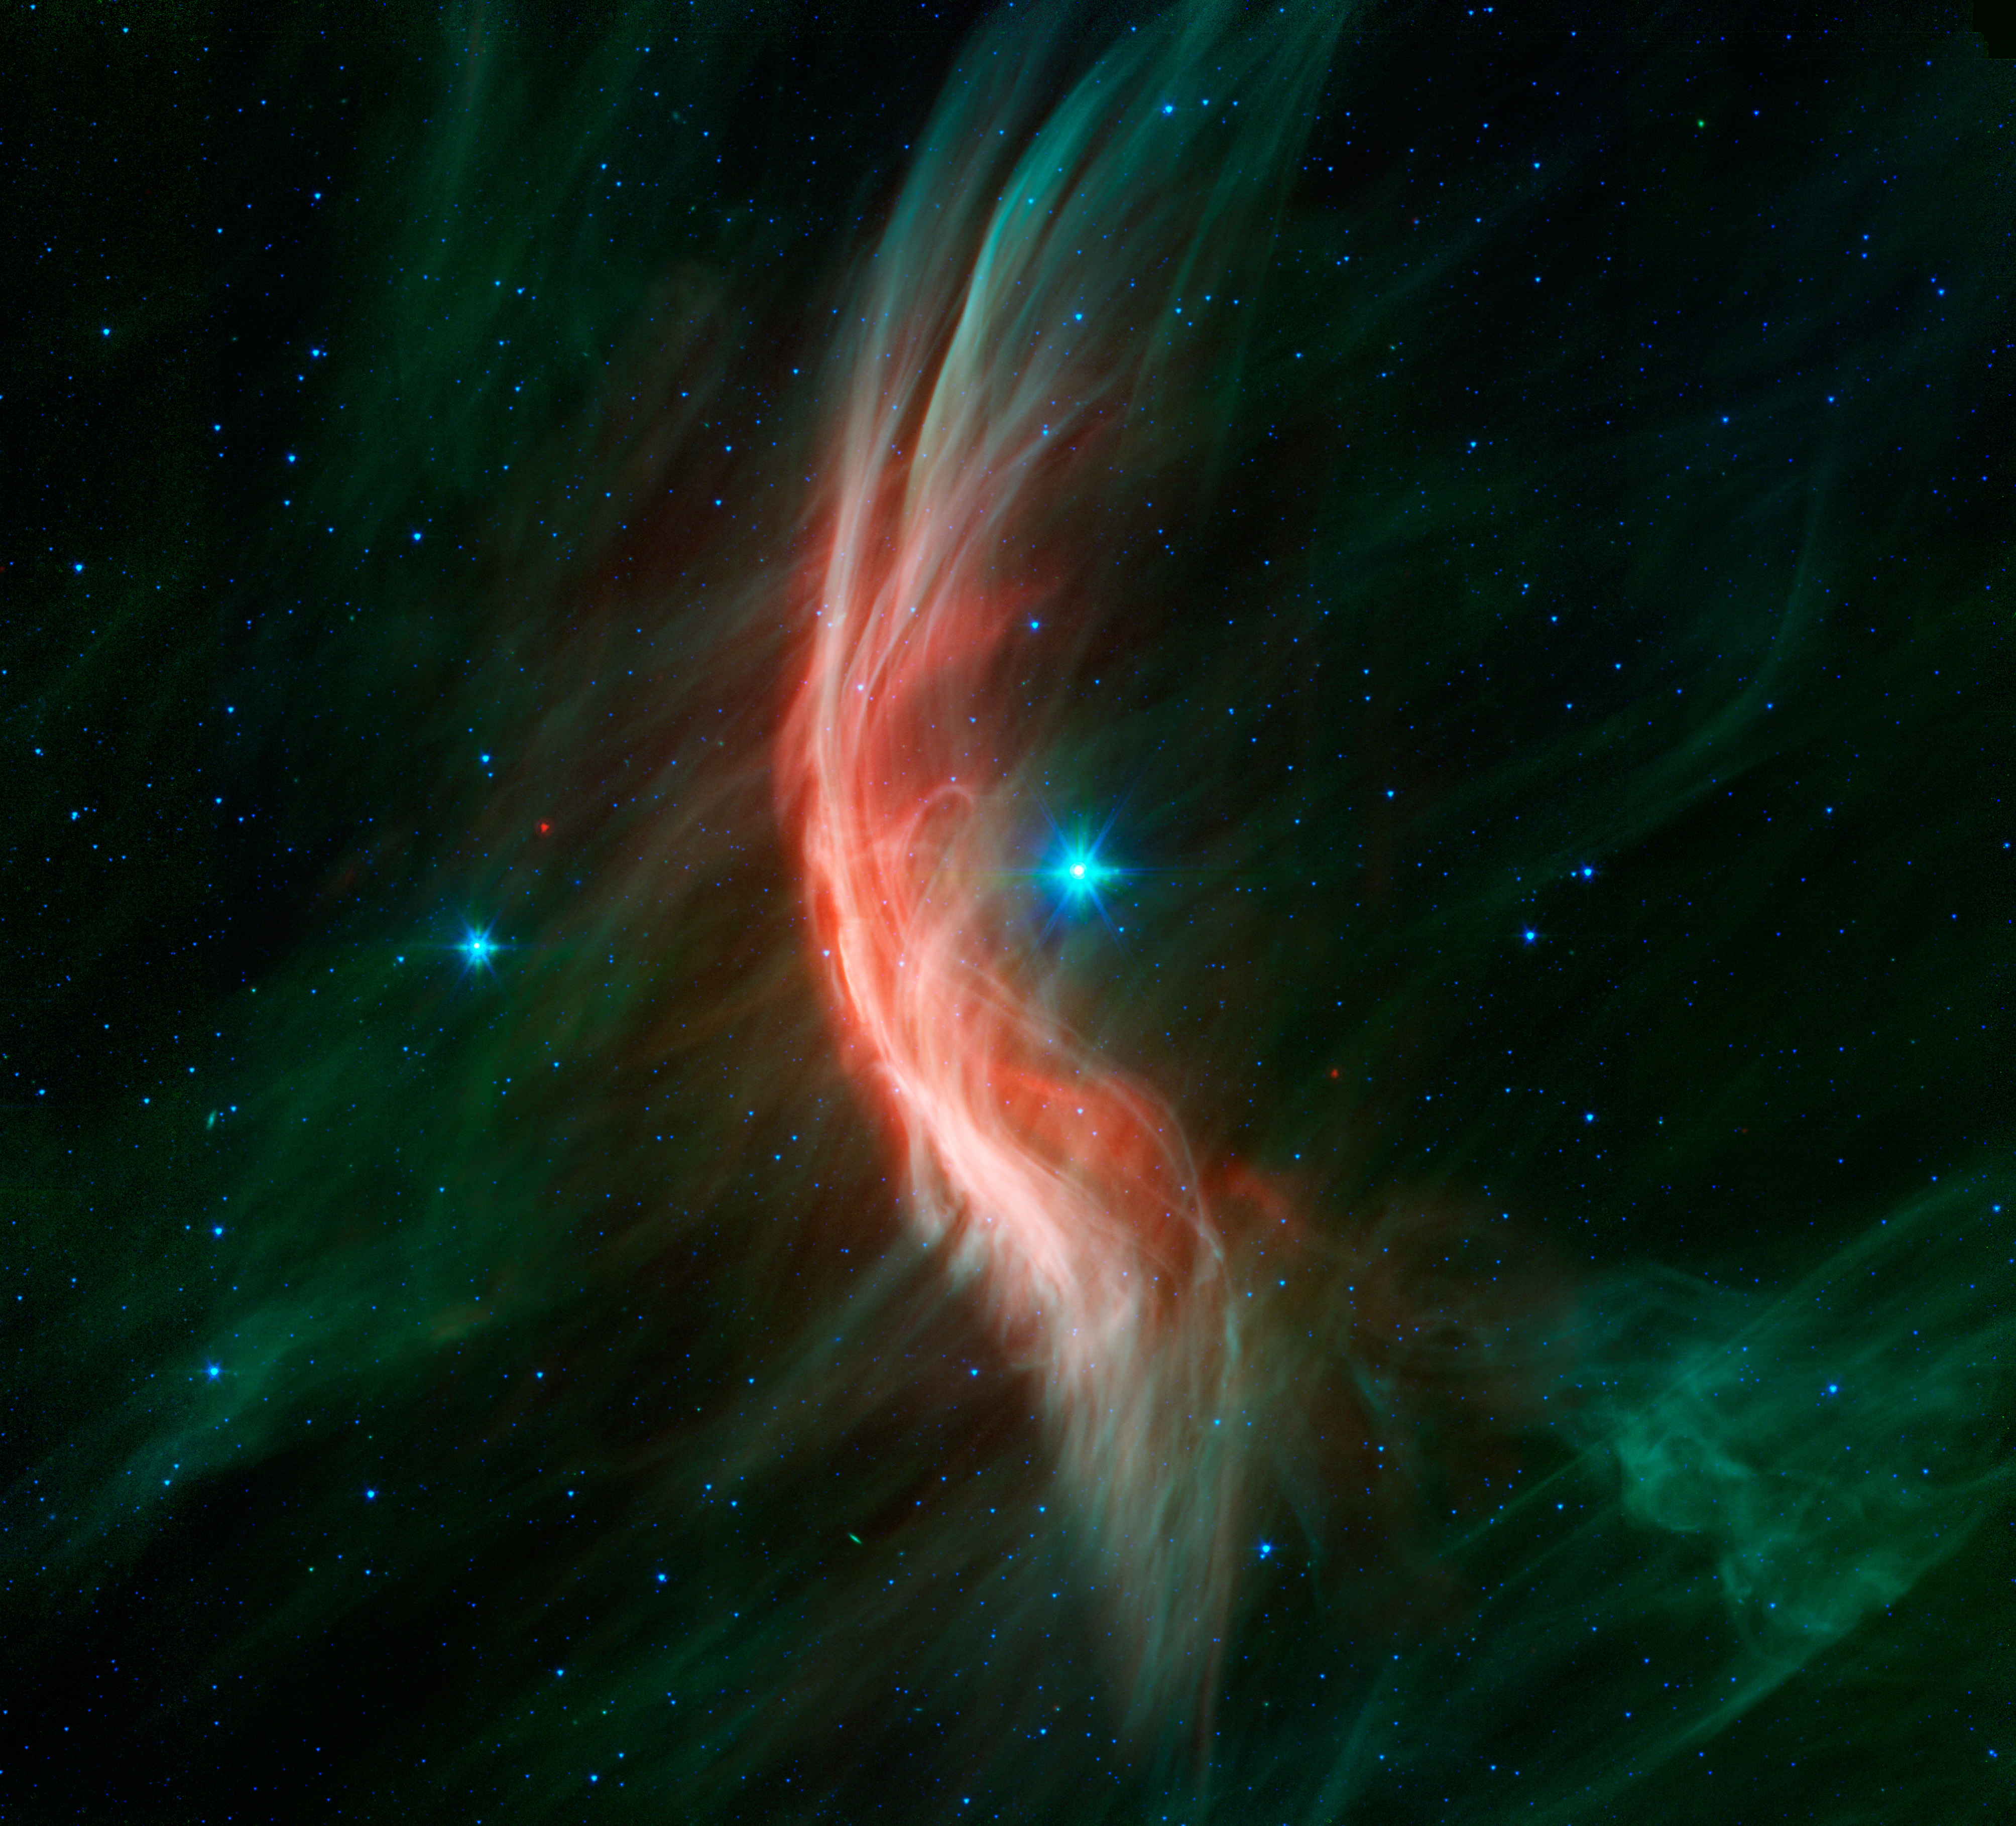 The giant star Zeta Ophiuchi is having a "shocking" effect on the surrounding dust clouds in this infrared image from NASAs Spitzer Space Telescope. Stellar winds flowing out from this fast-moving star are making ripples in the dust as it approaches, crea